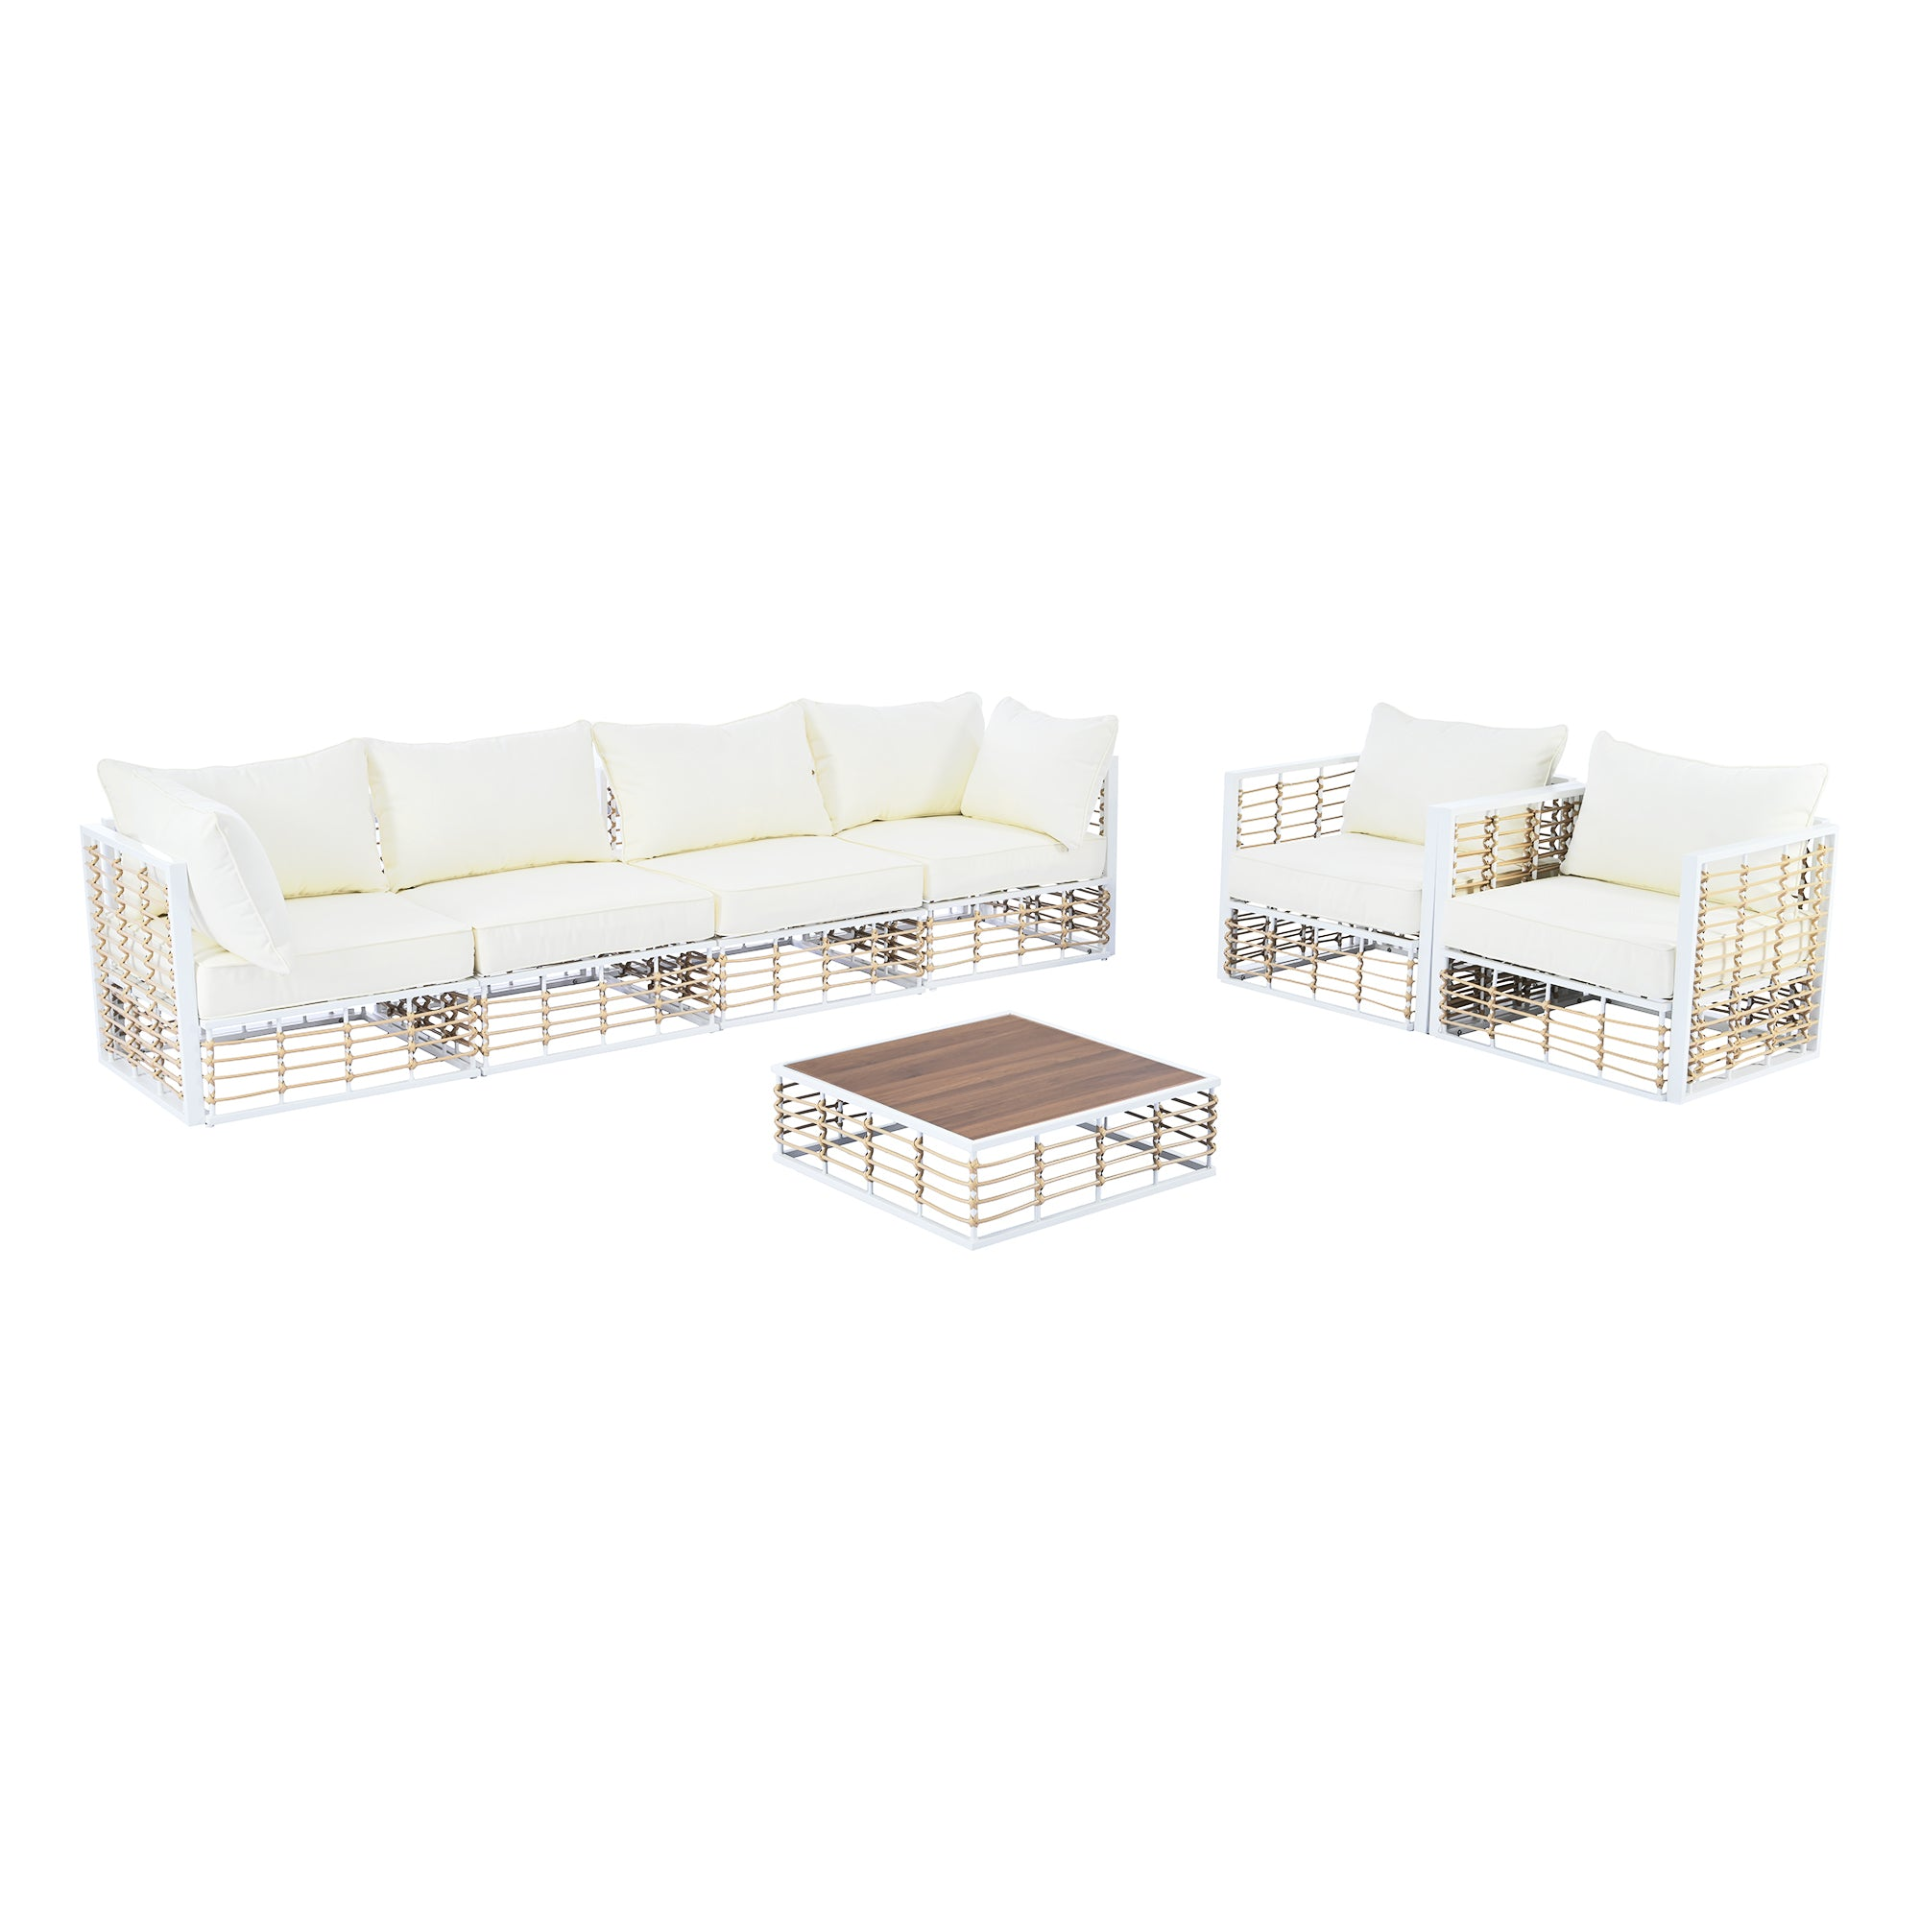 Modern Minimalist 7-Piece Metal Patio Sectional Sofa Set, All-Weather Garden Conversational Furniture Set with Thick Cushions and Coffee Table for Indoor Outdoor, White Môdern Space Gallery